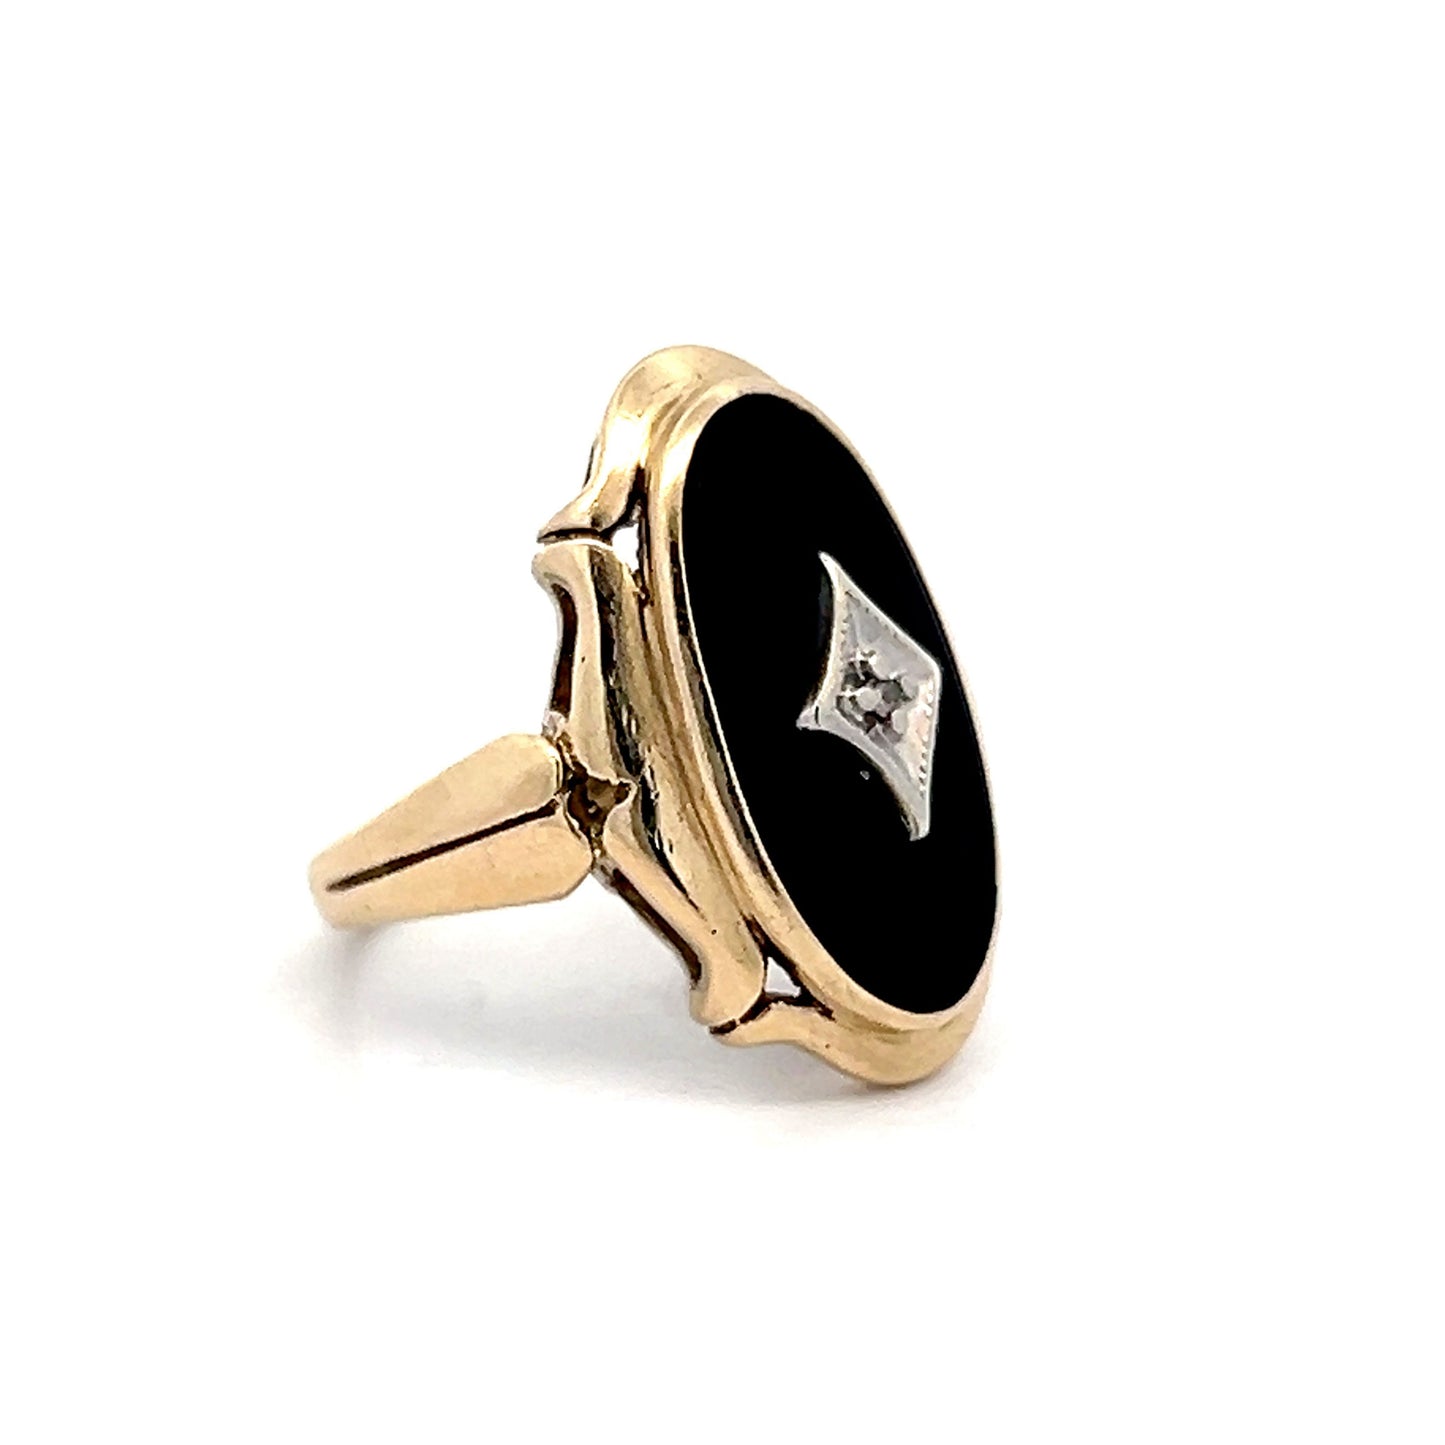 Vintage Art Deco Black Onyx Cocktail Ring in 10k Yellow Gold